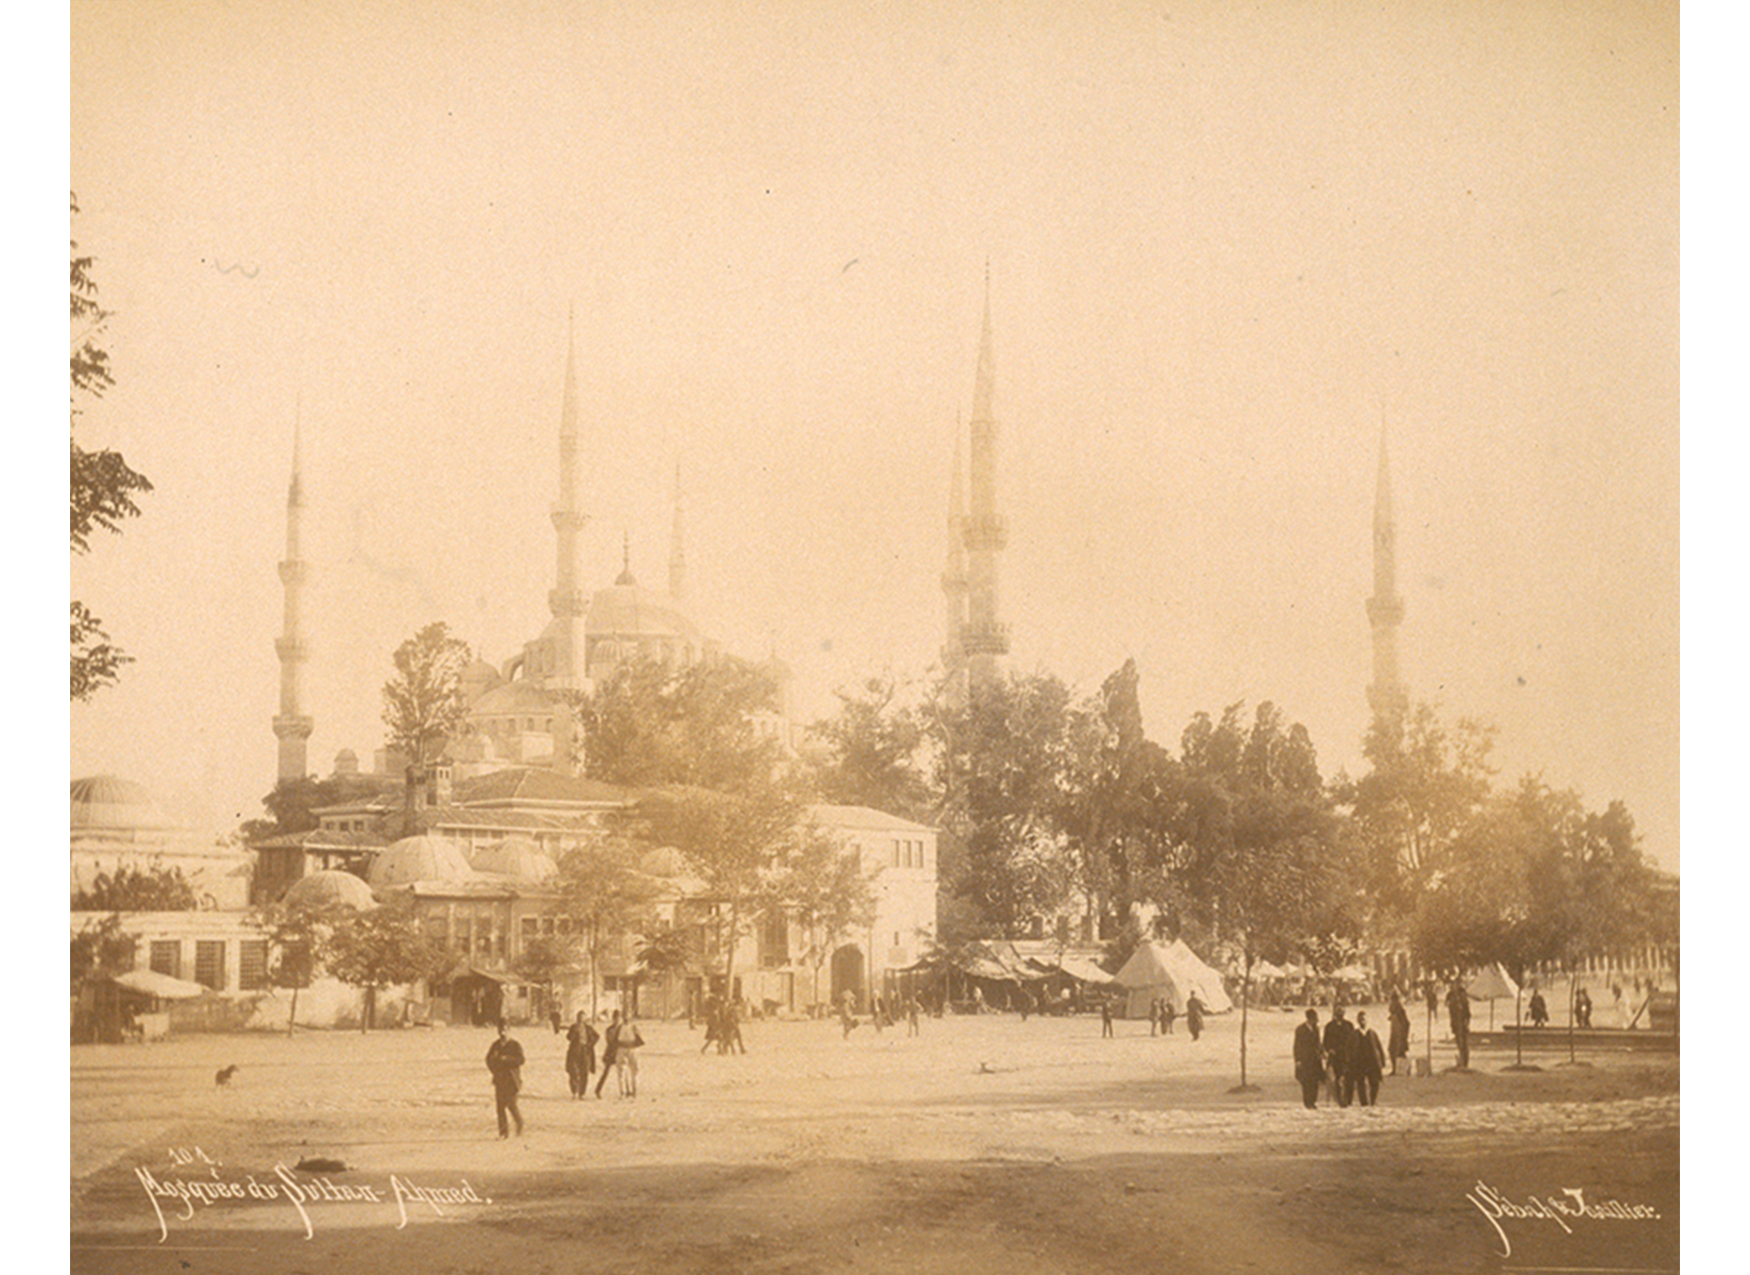 photograph of a large building (Sultan Ahmet Mosque in Istanbul) with a field in front of it and people walking around